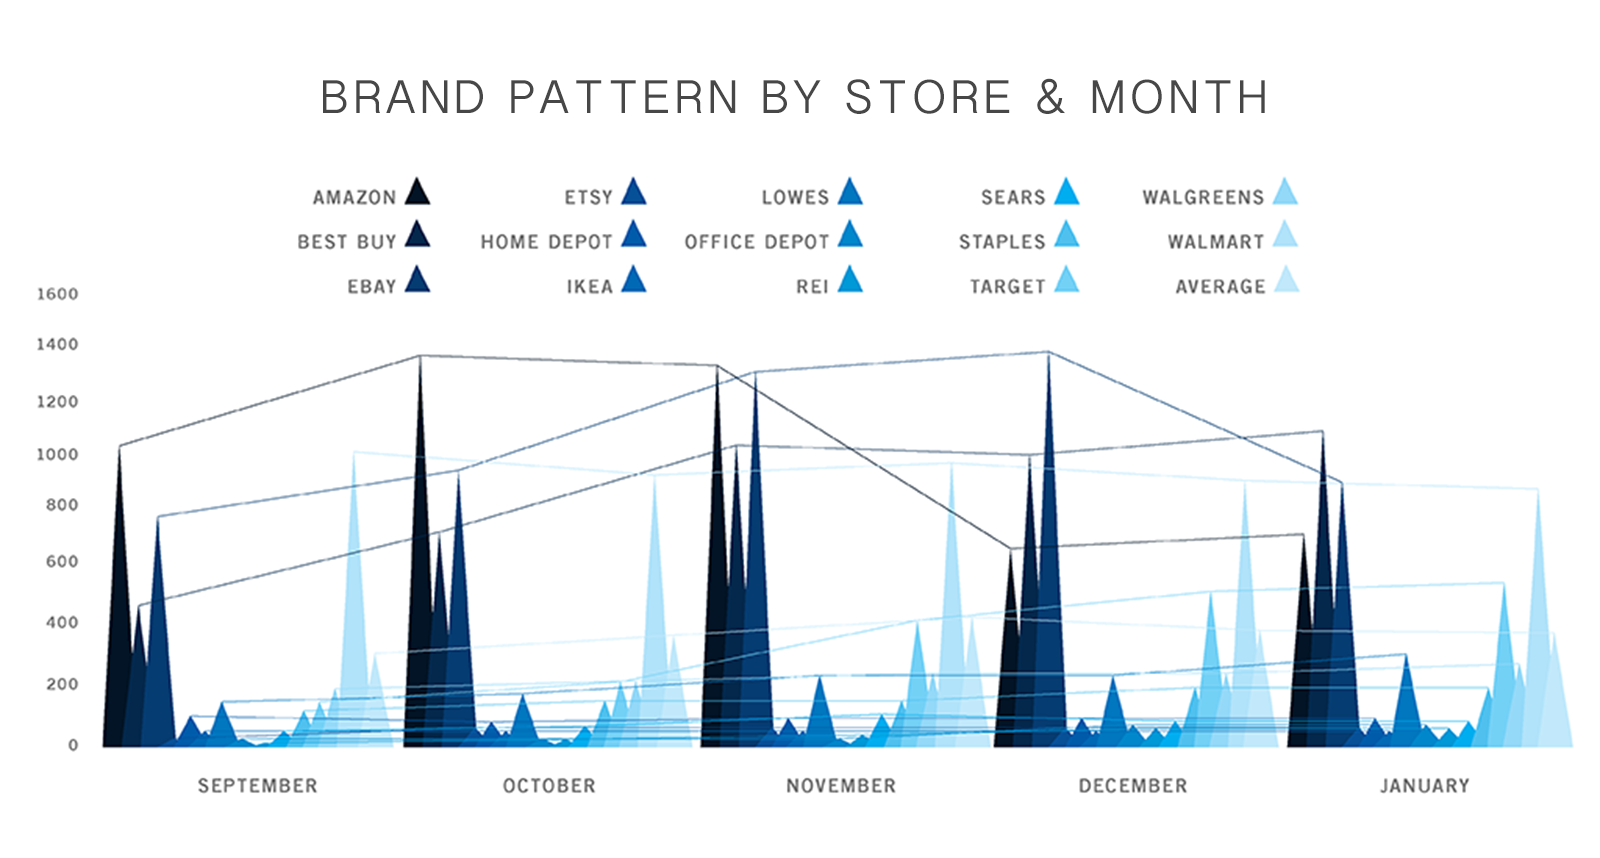 Brand pattern by store and month